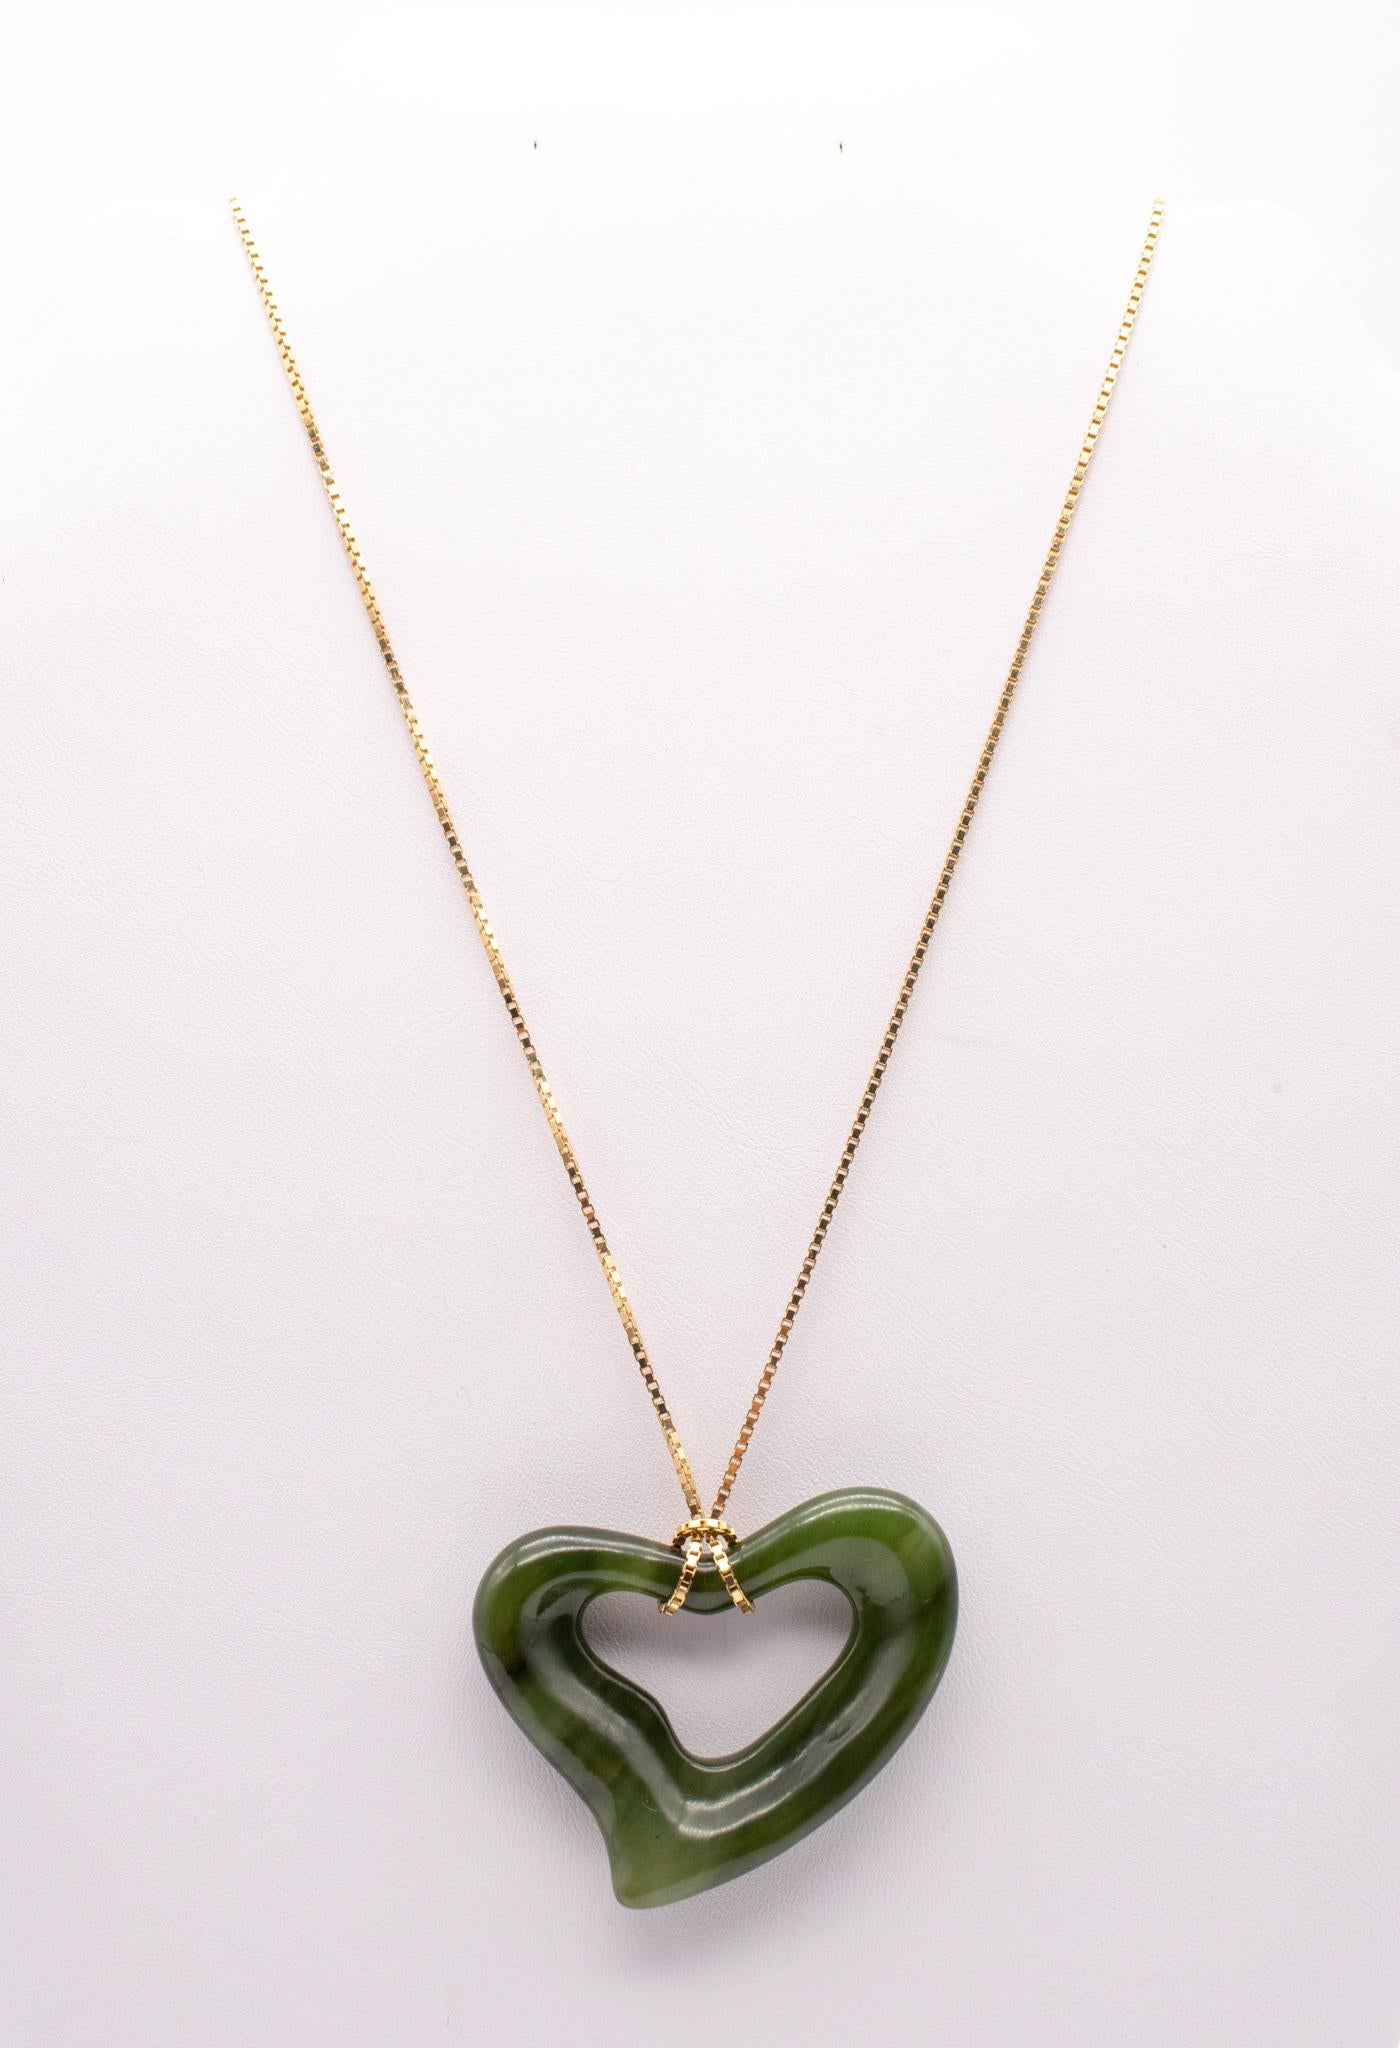 Modernist Tiffany Co. 1970 by Elsa Peretti Chain Necklace in 18kt Gold with Carved Nephrit For Sale